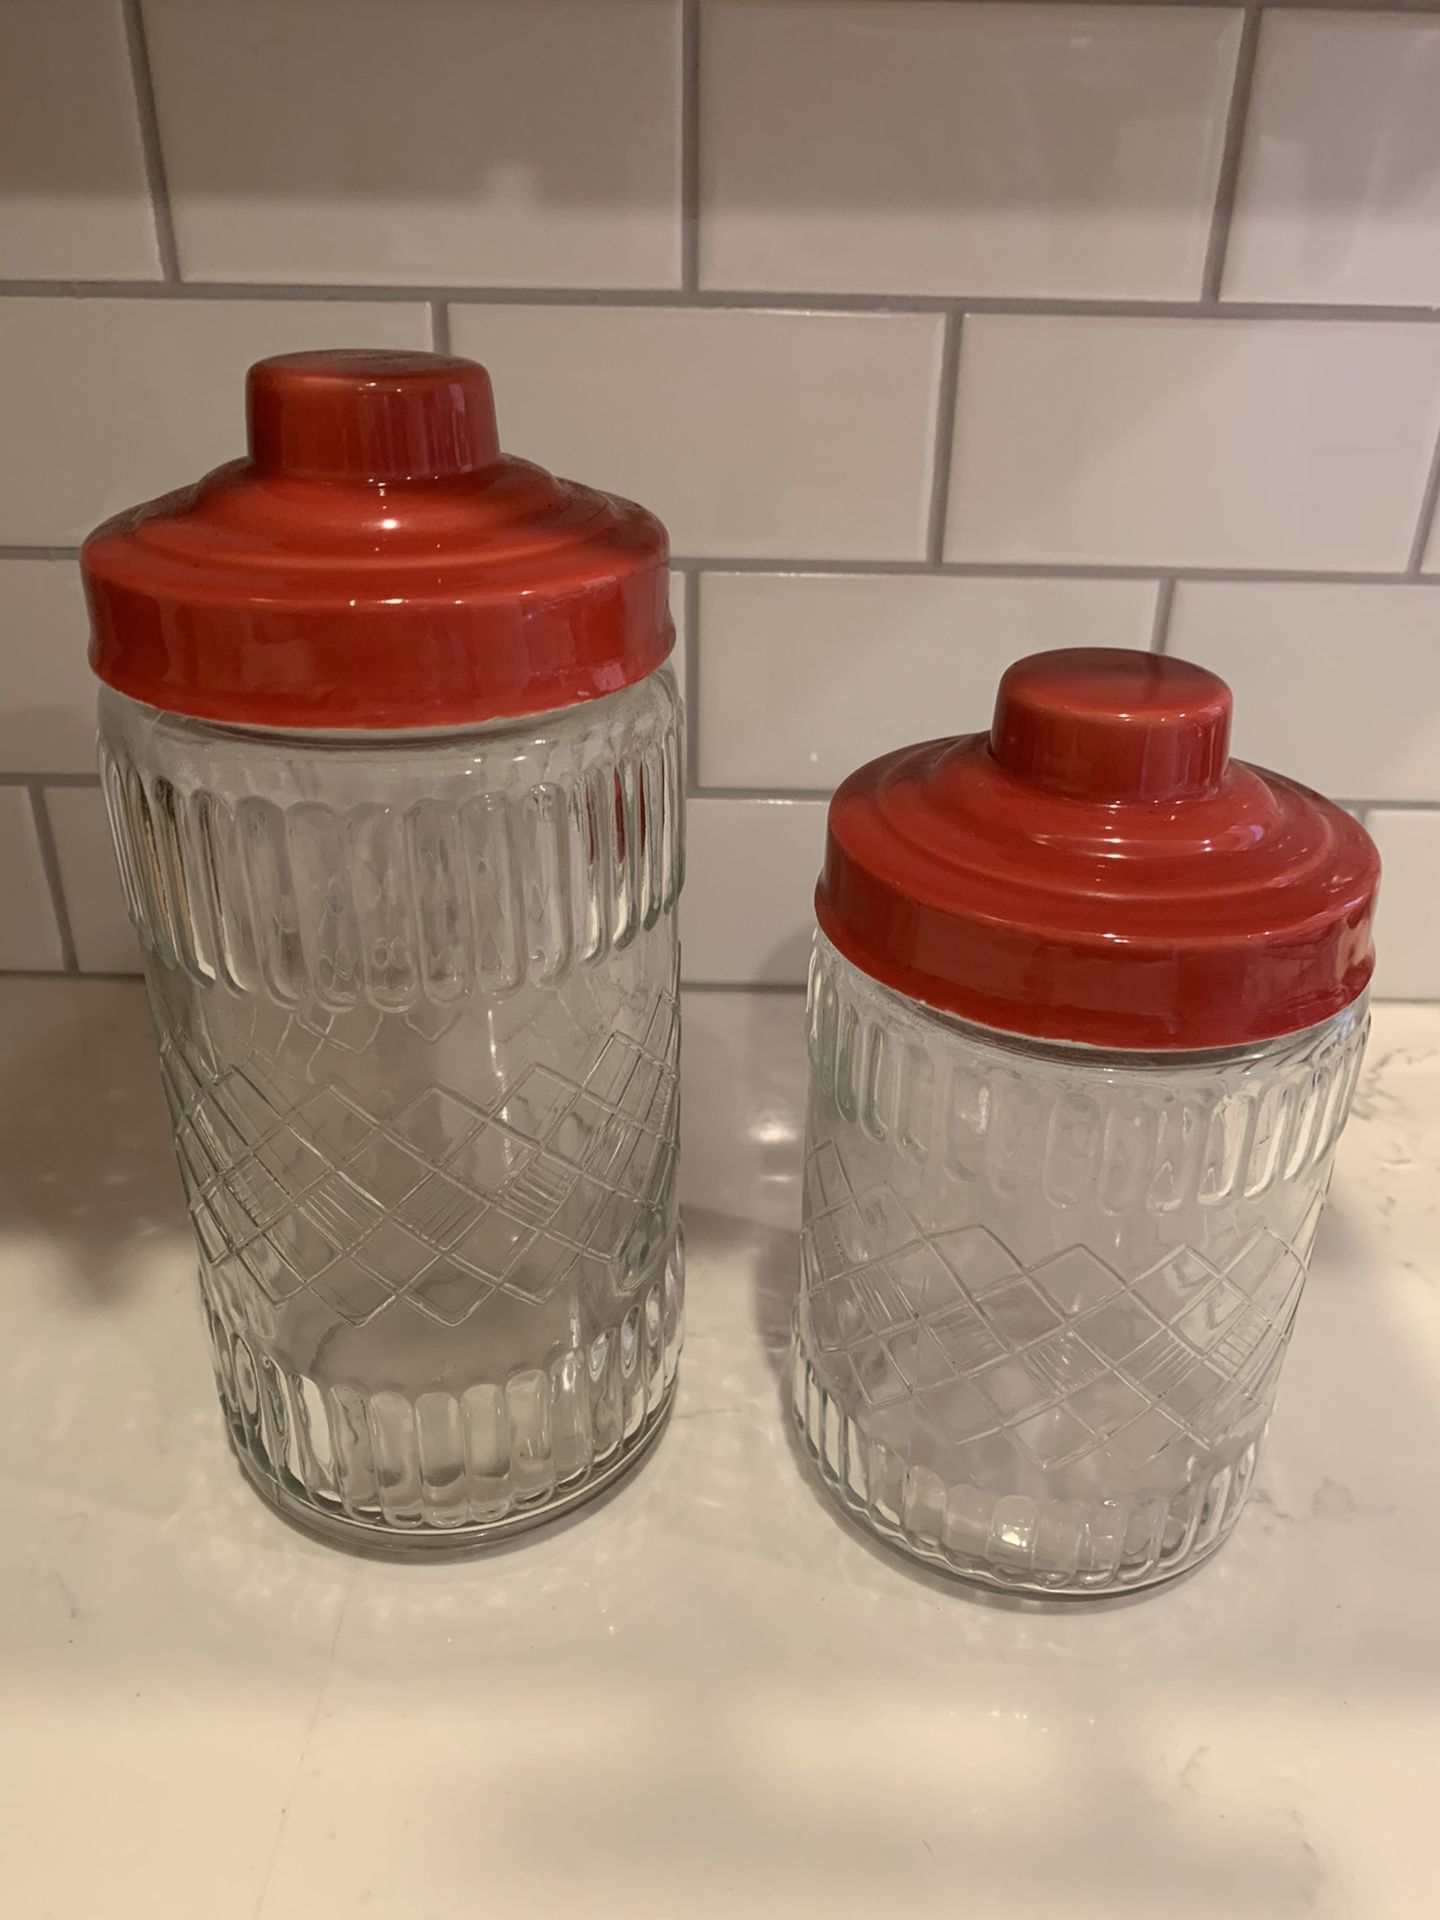 Vintage glass canisters